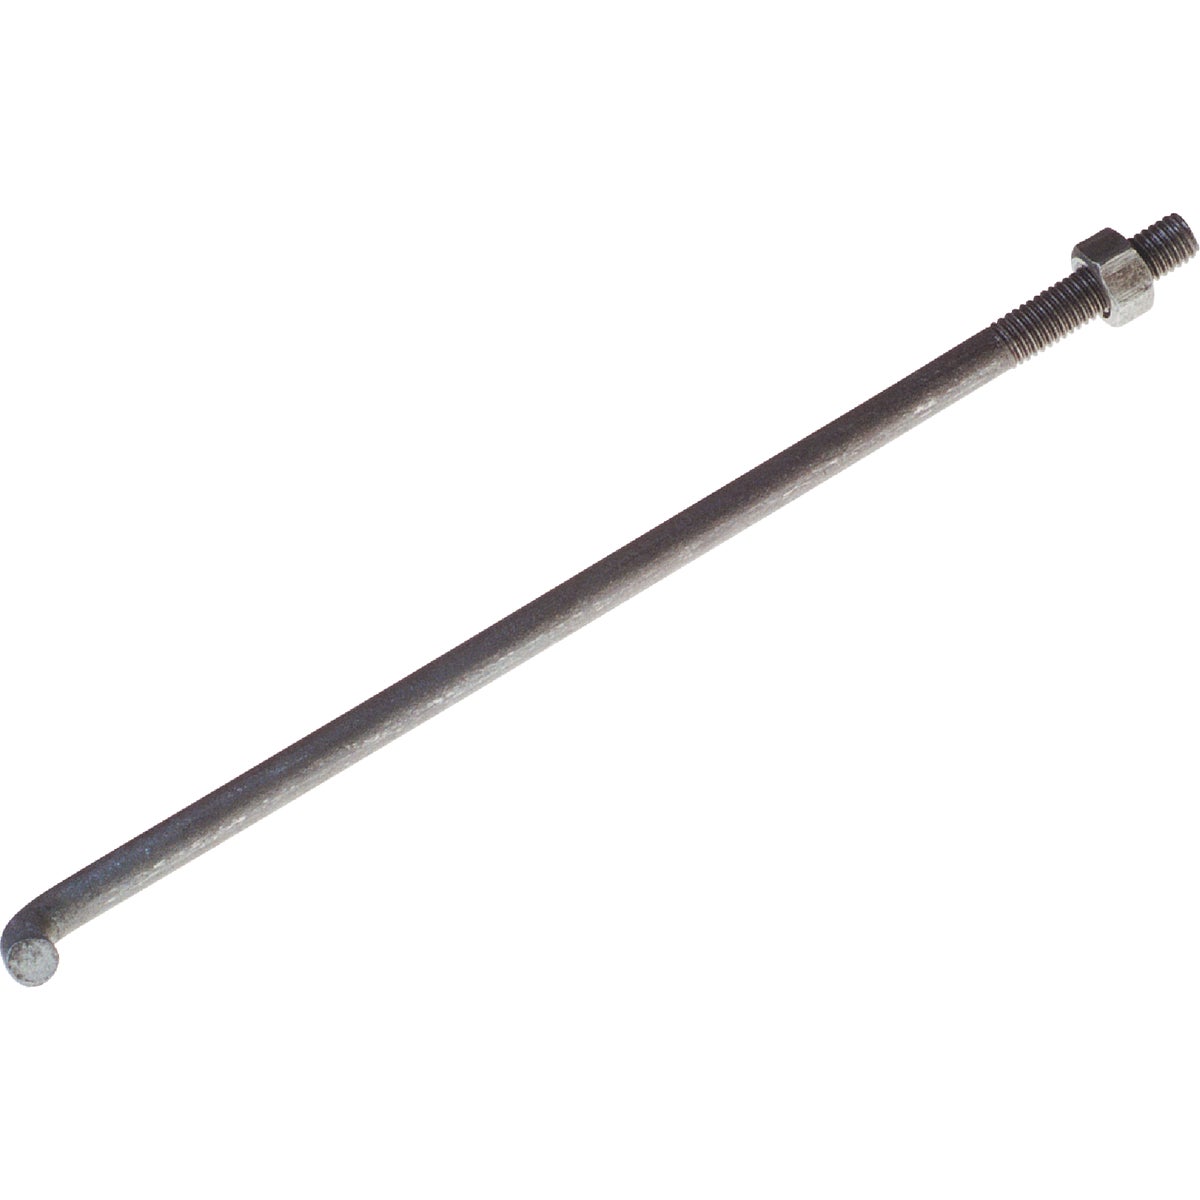 Item 704633, Hot galvanized anchor bolt with nuts - no washers.